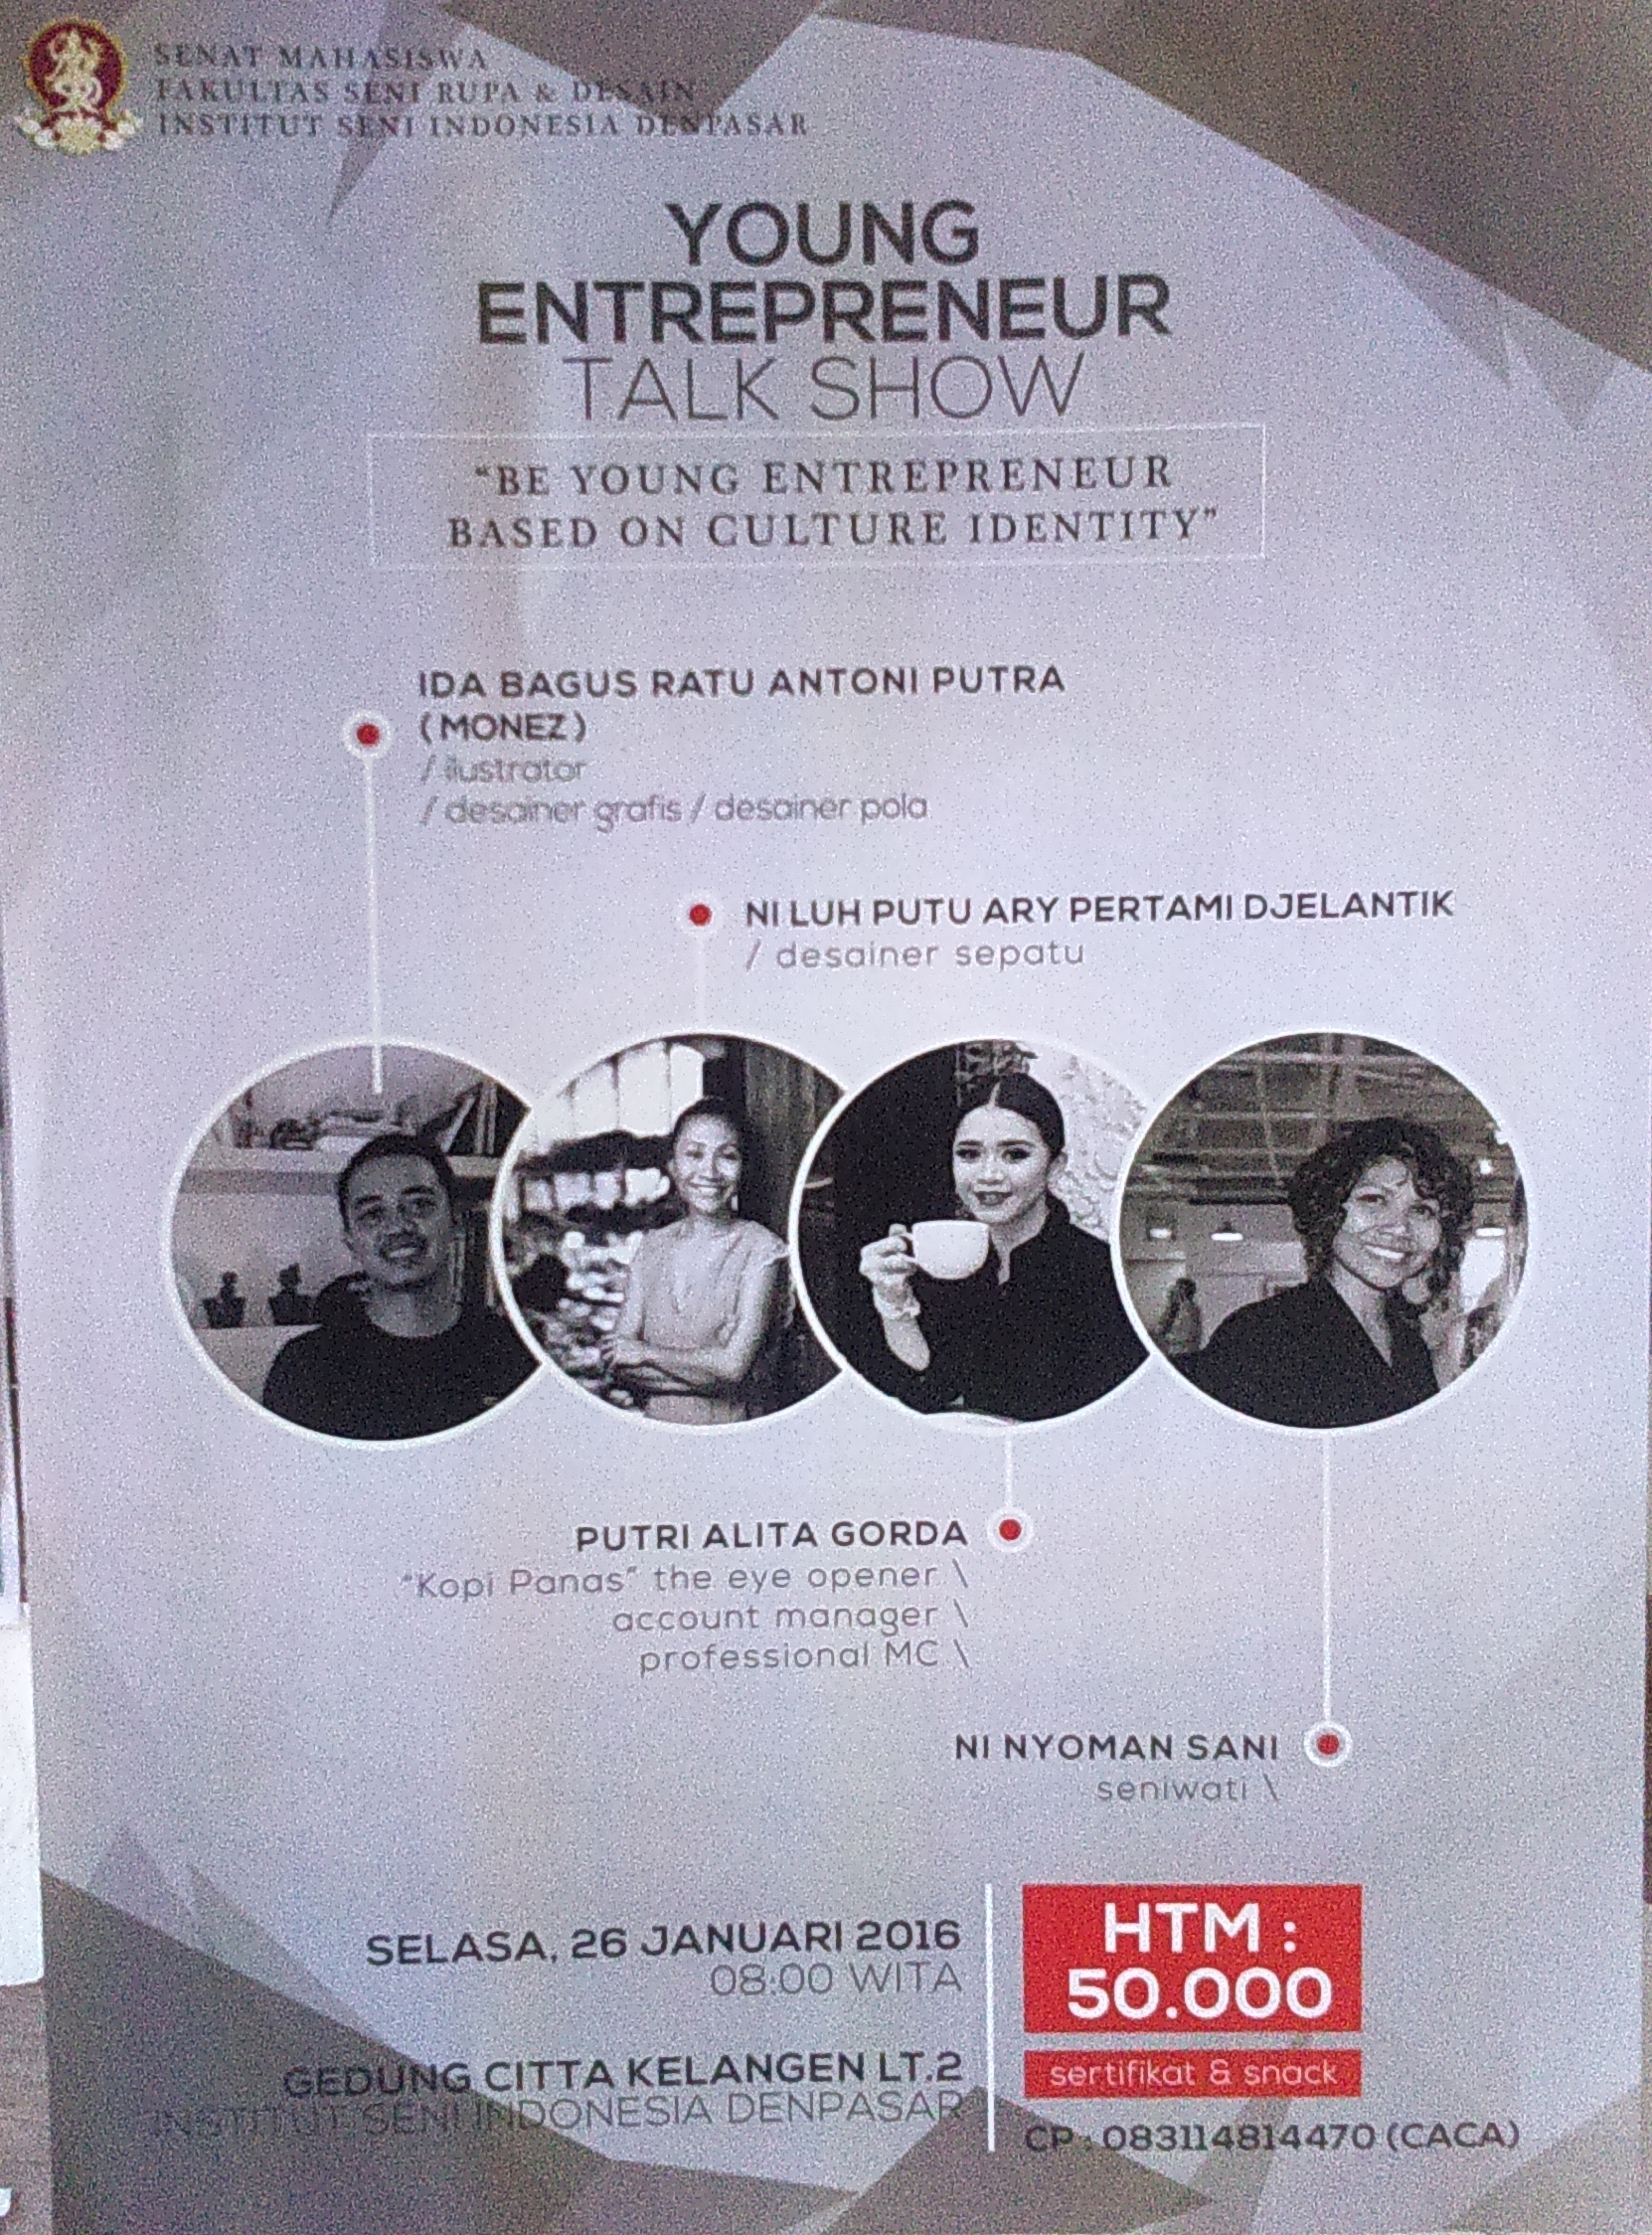 Young entrepreneur talkshow isi